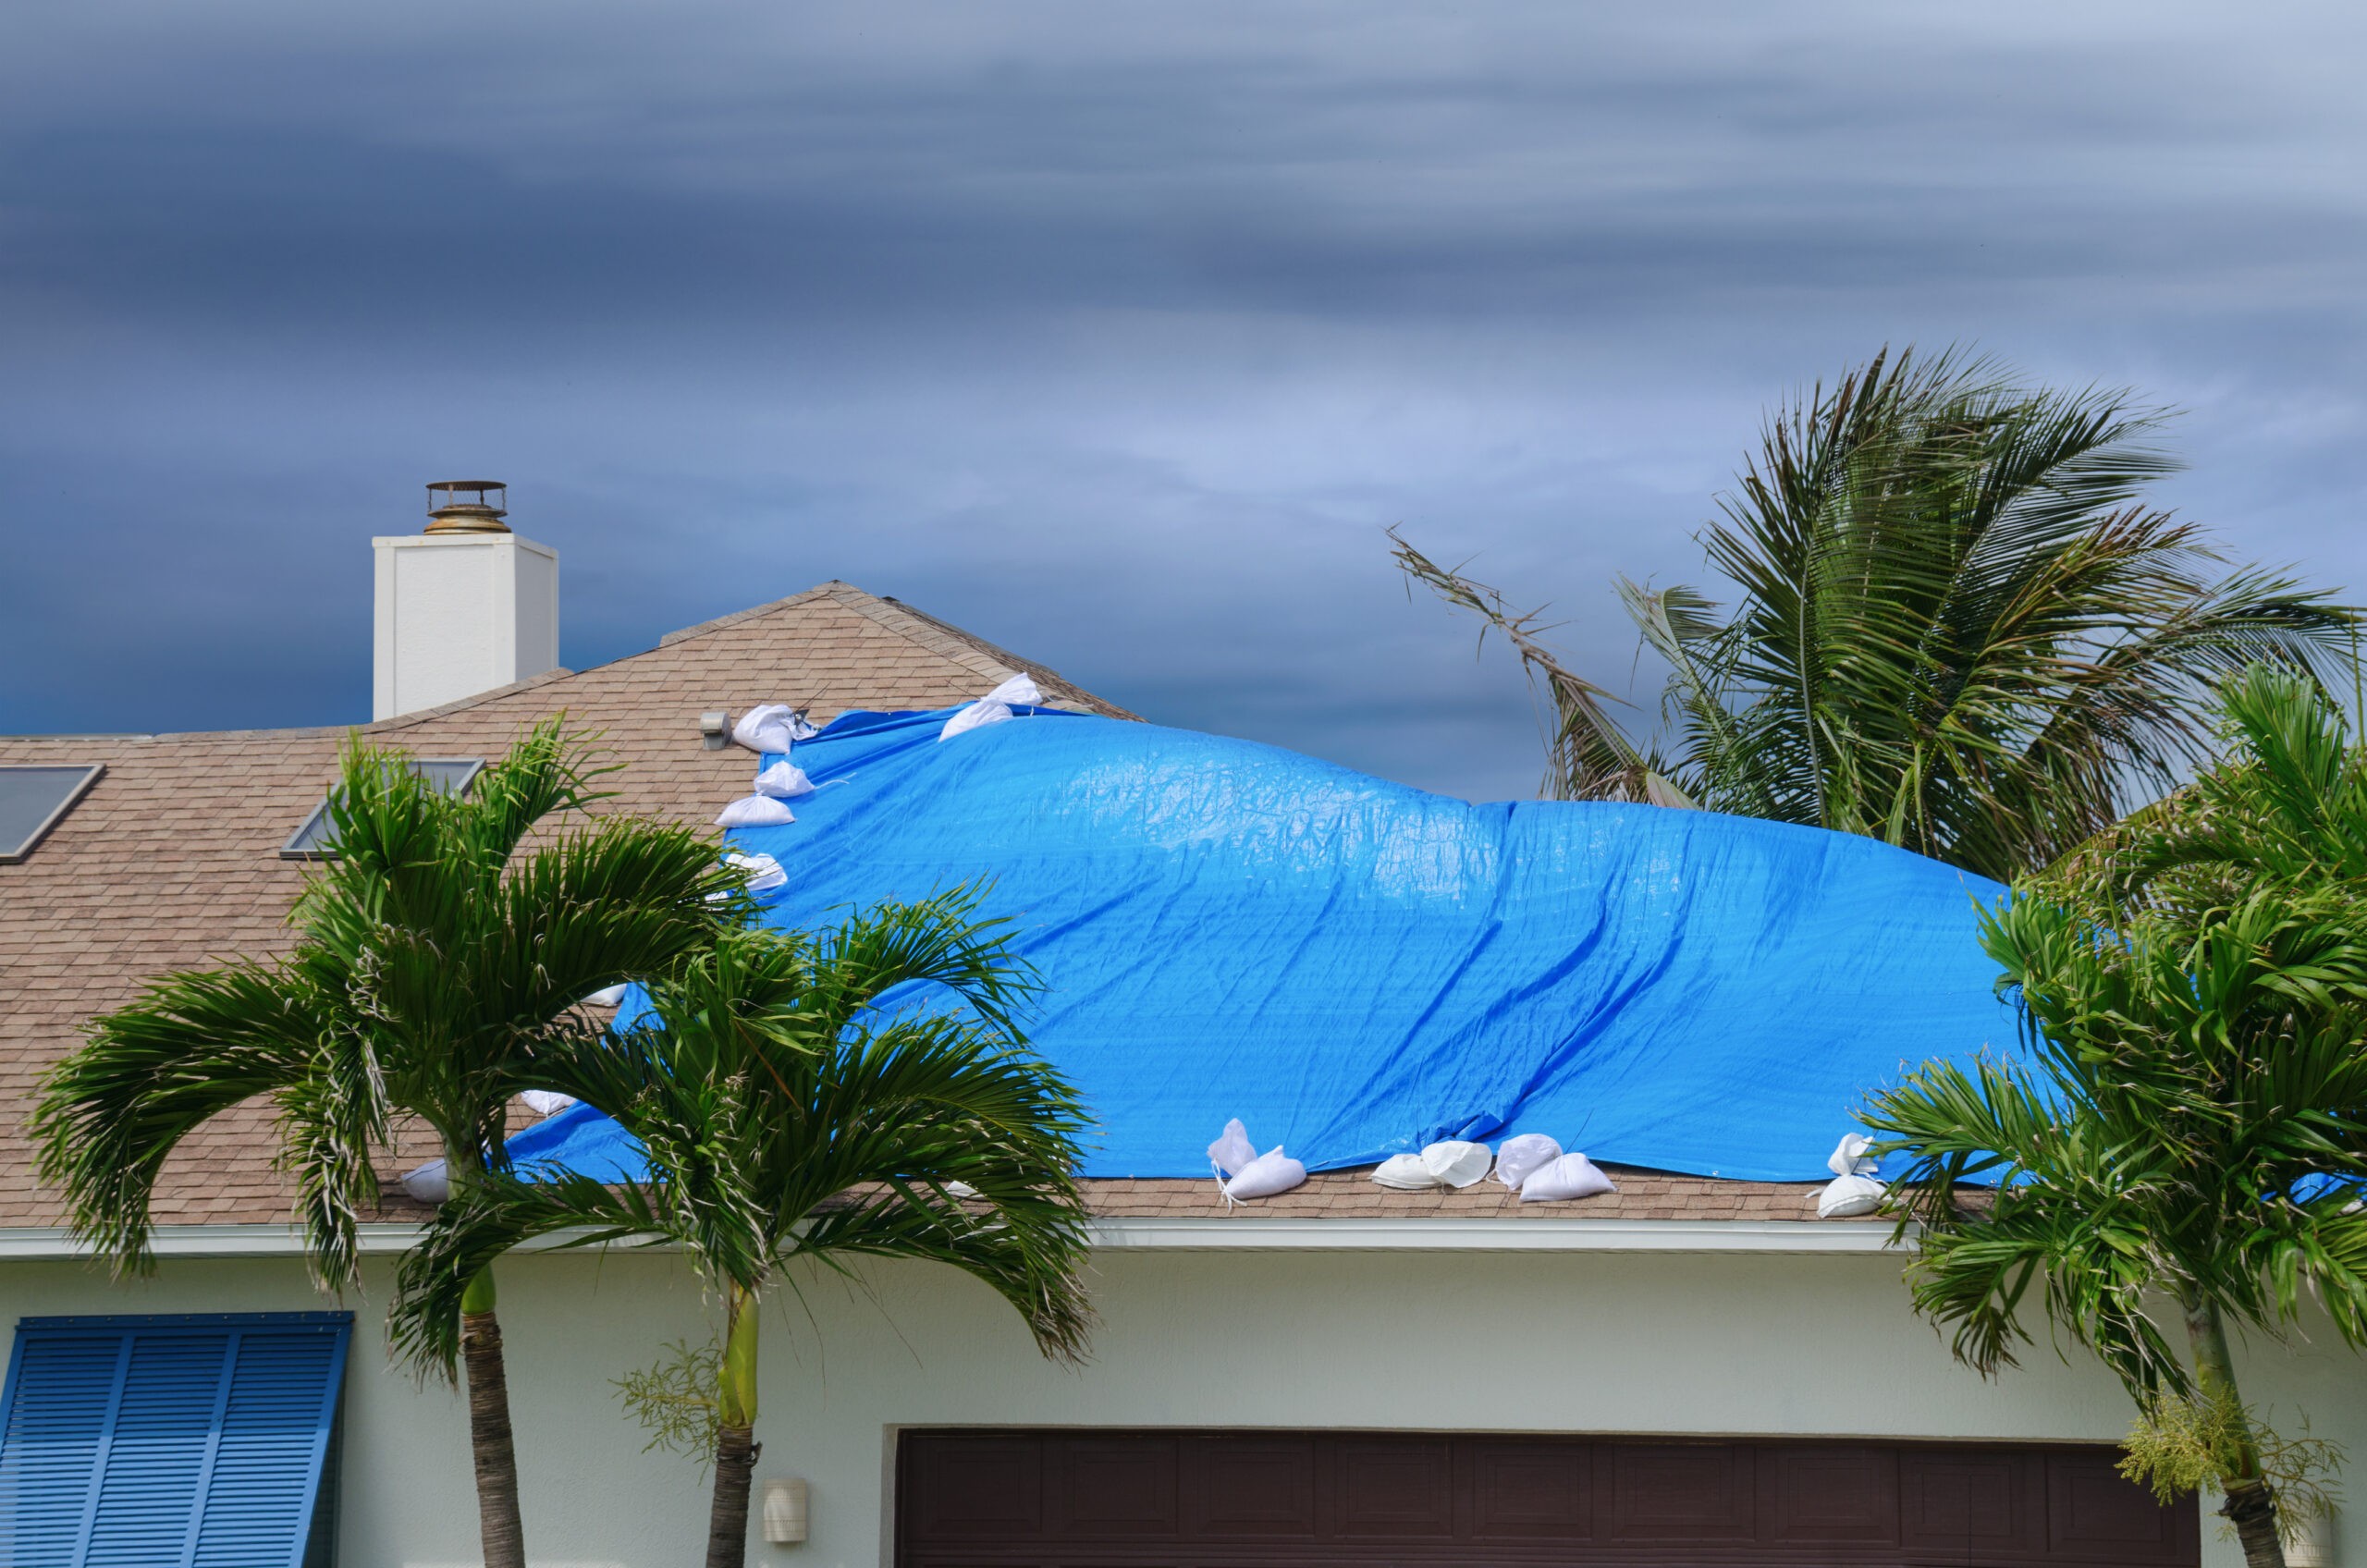 hurricane-prone damaged roof on house with a blue plastic tarp over hole